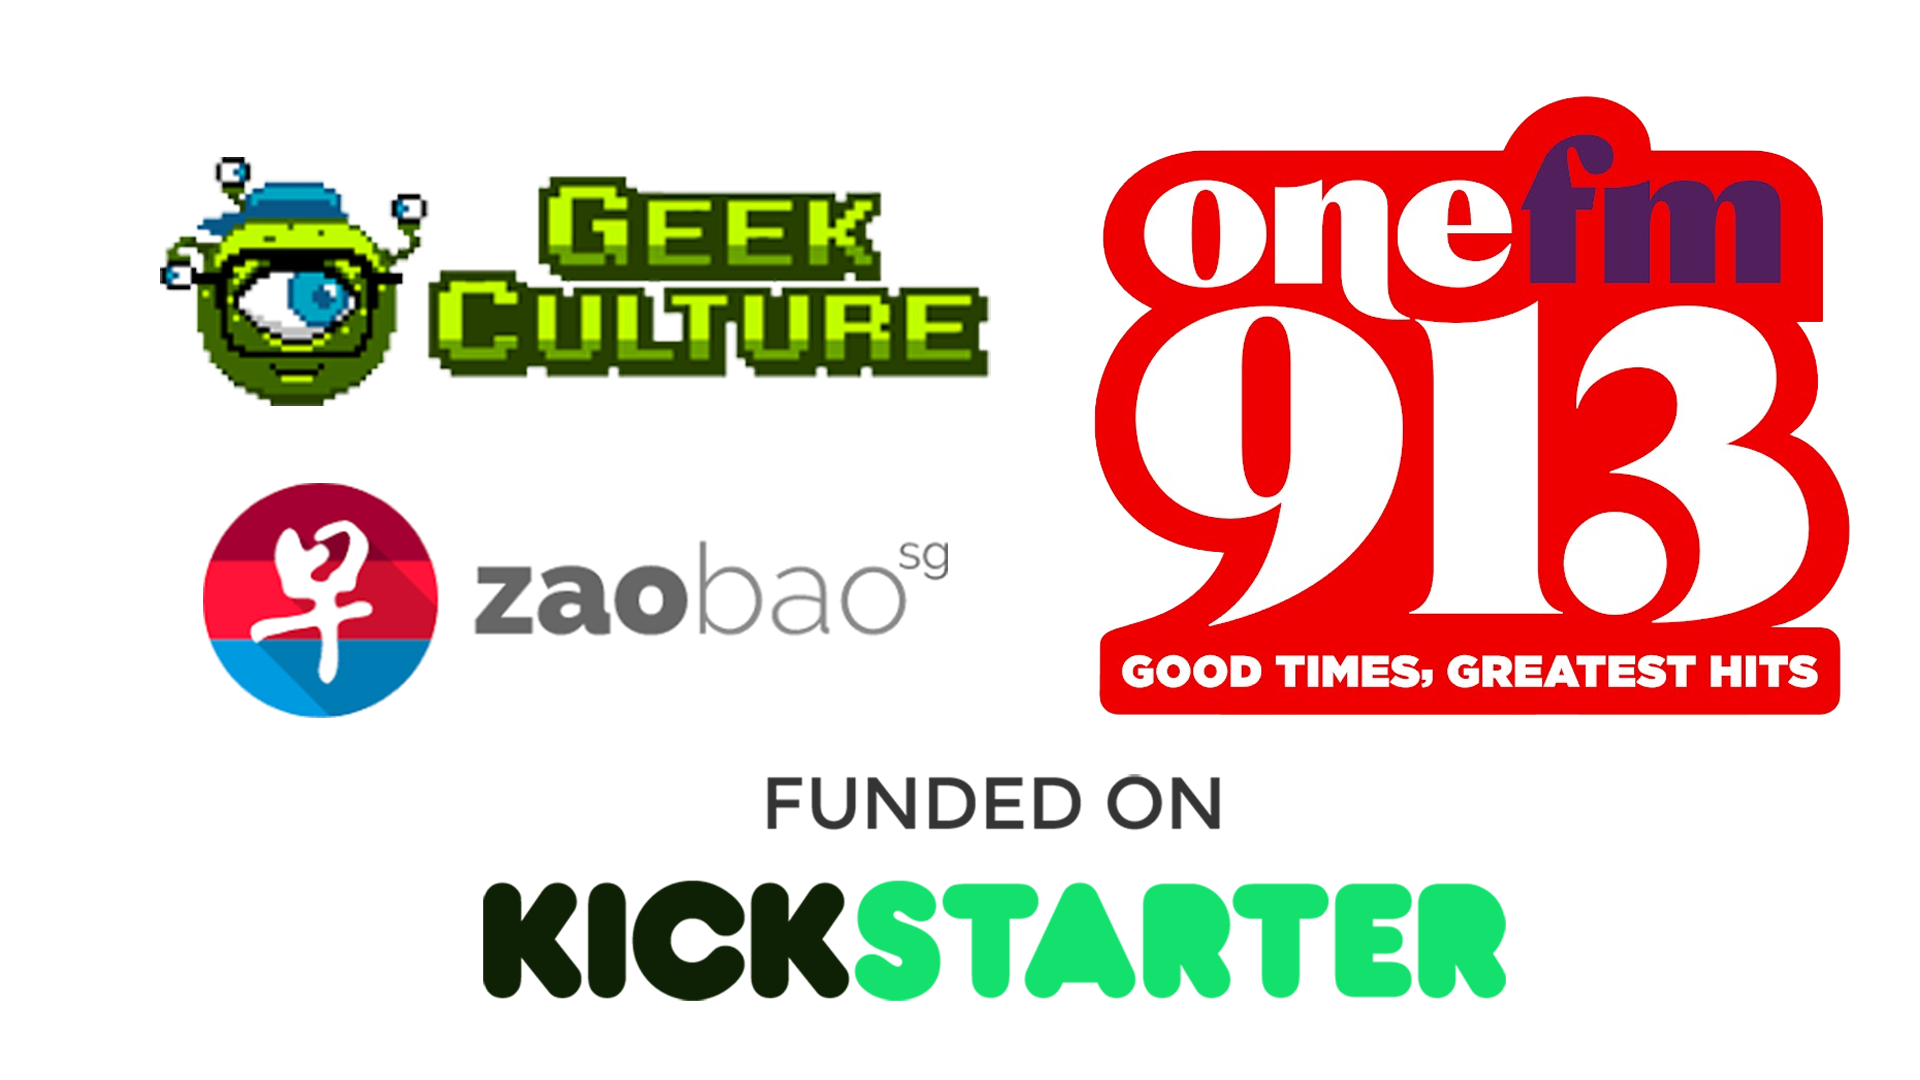 Featured on Geek Culture, Lianhe Zaobao, One Fm 91.3, and fully funded on Kickstarter!